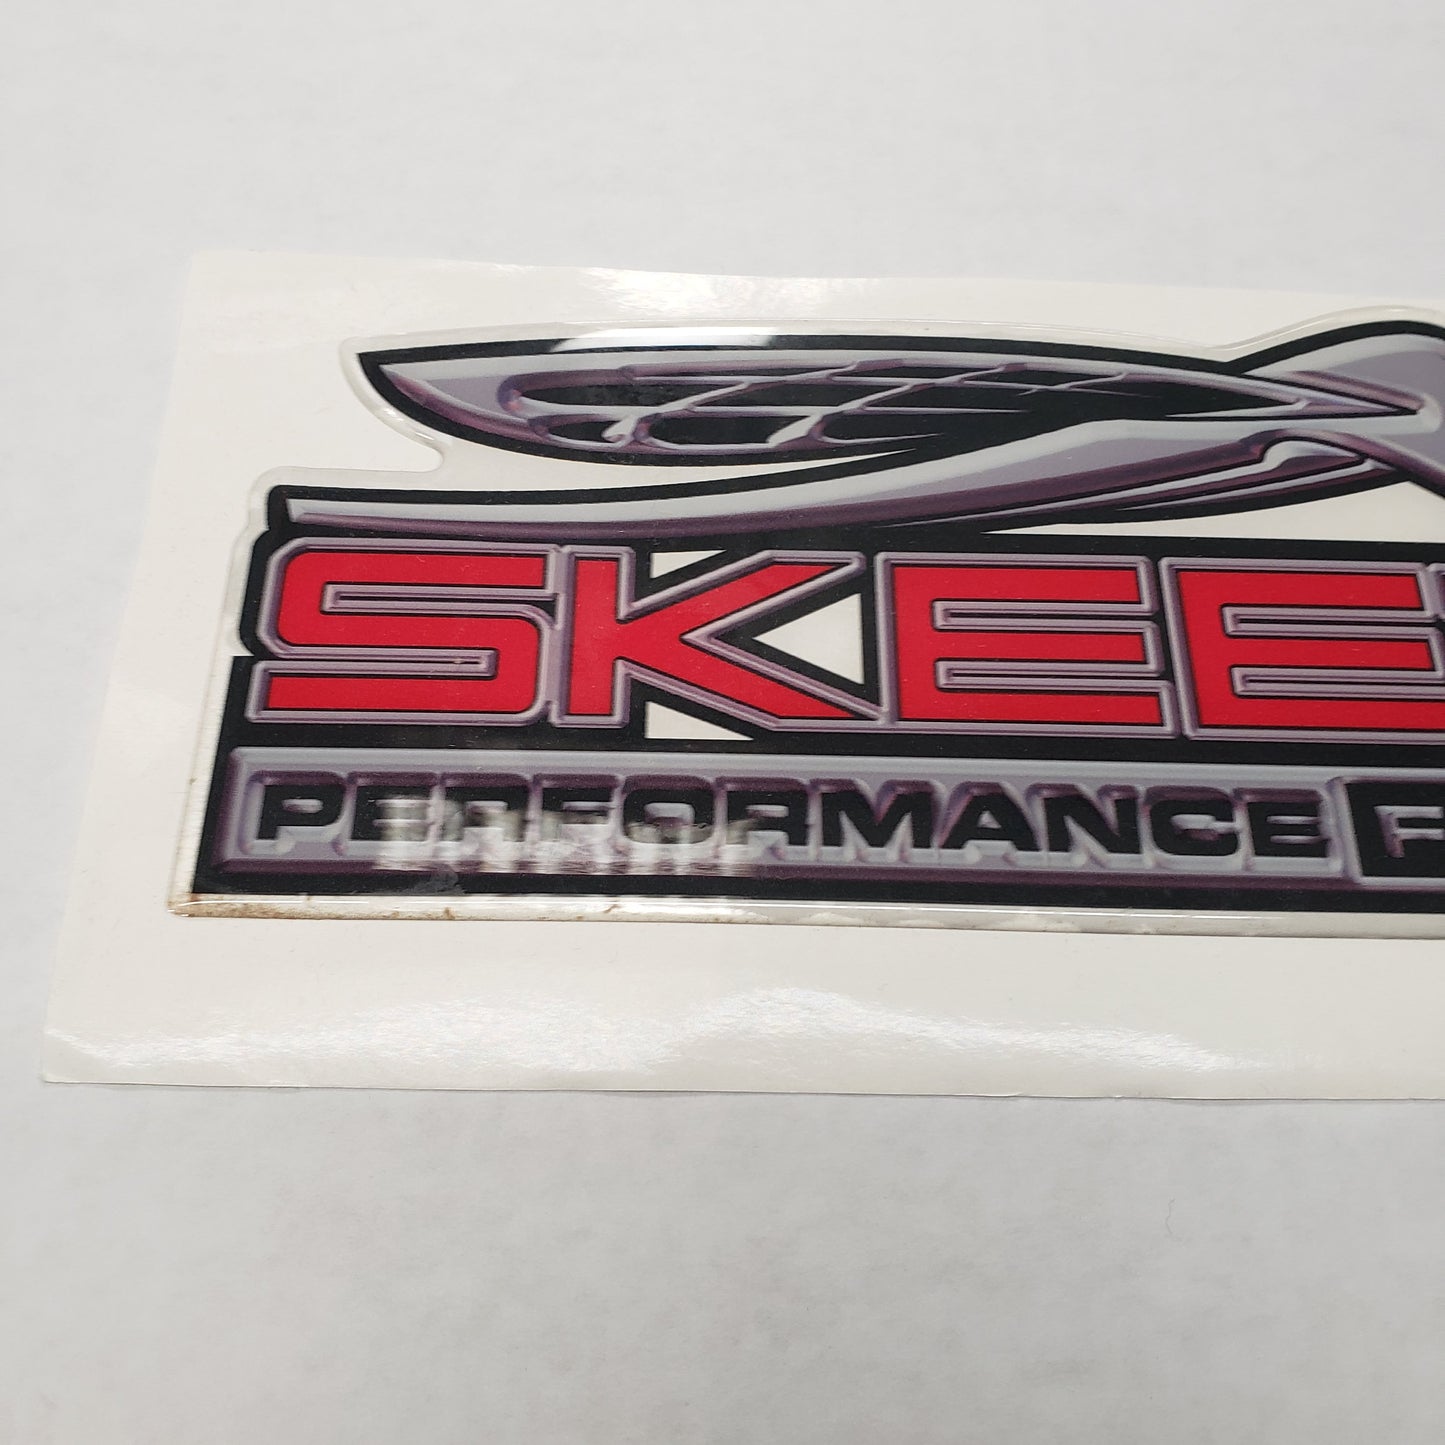 New Authentic Skeeter with Bug Emblem Red/ White/ Black/ Domed 12"